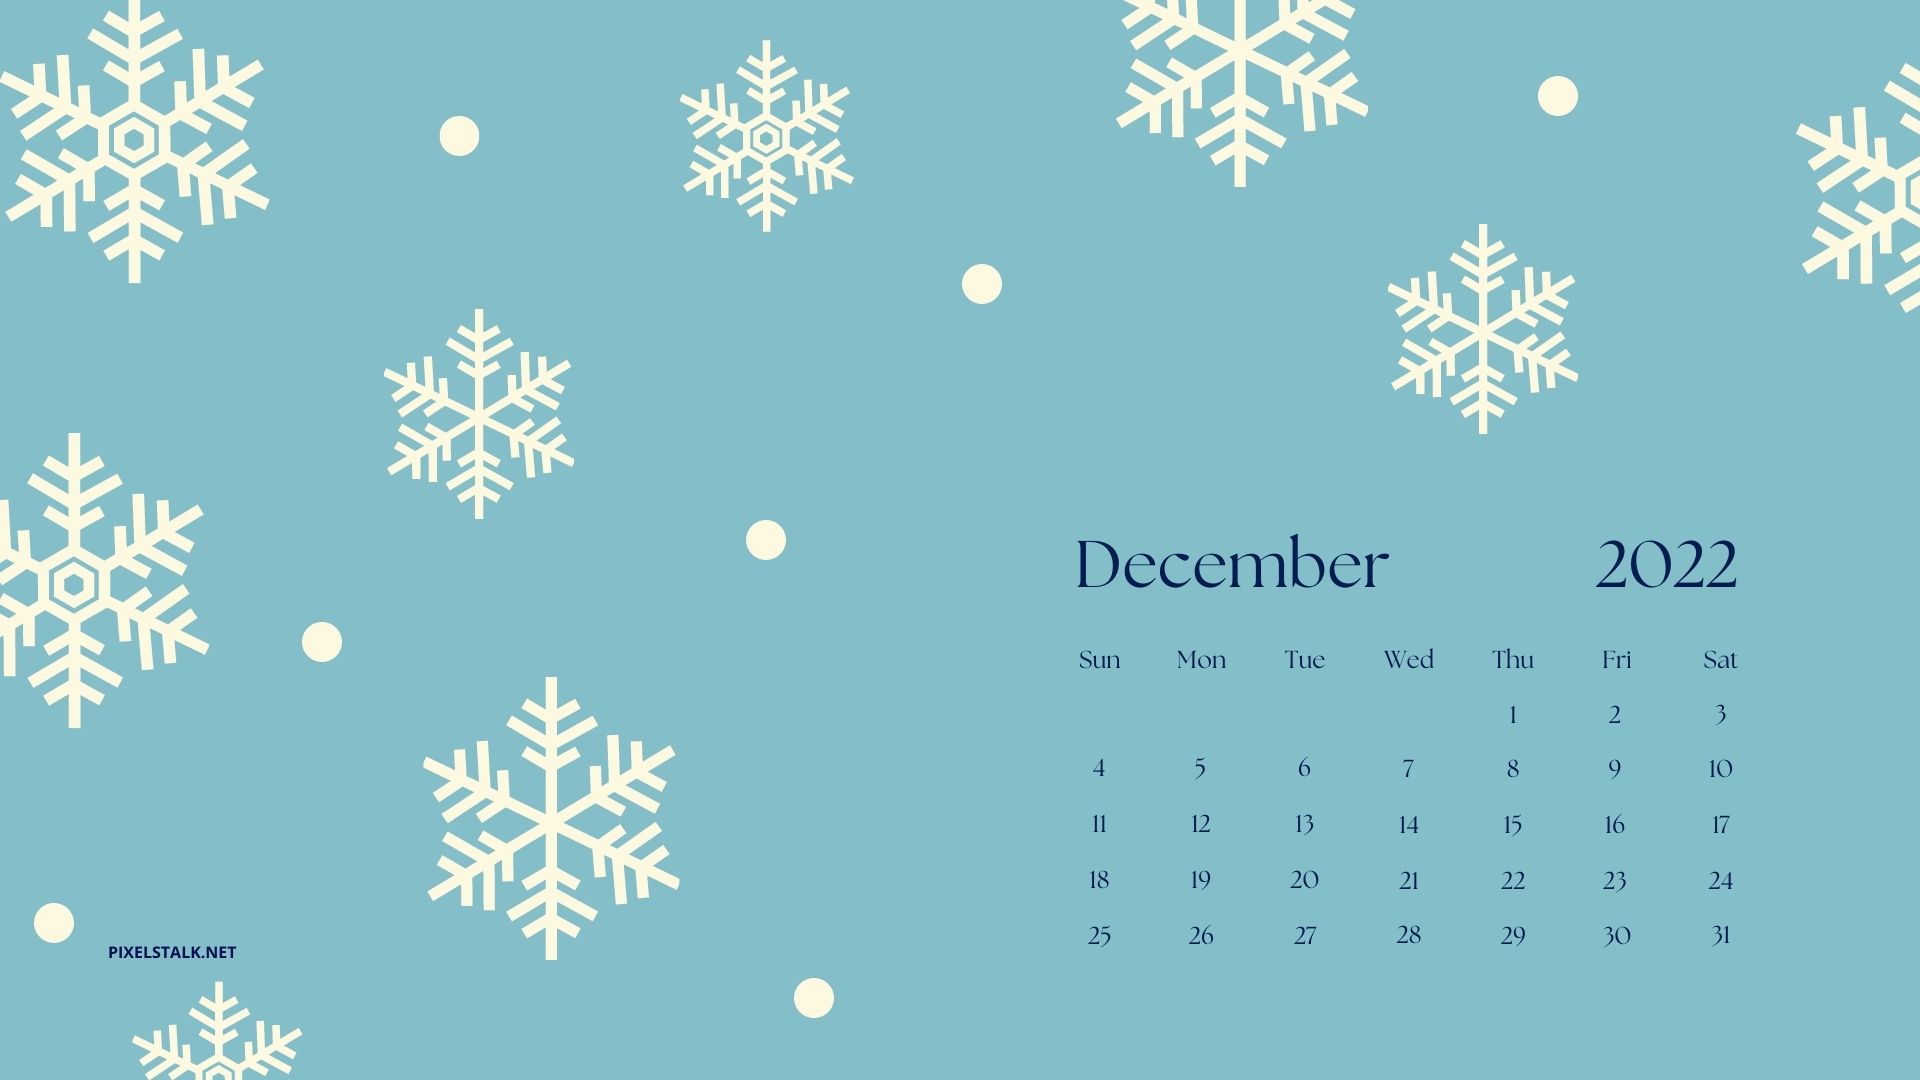 Our December Wallpaper is Here!